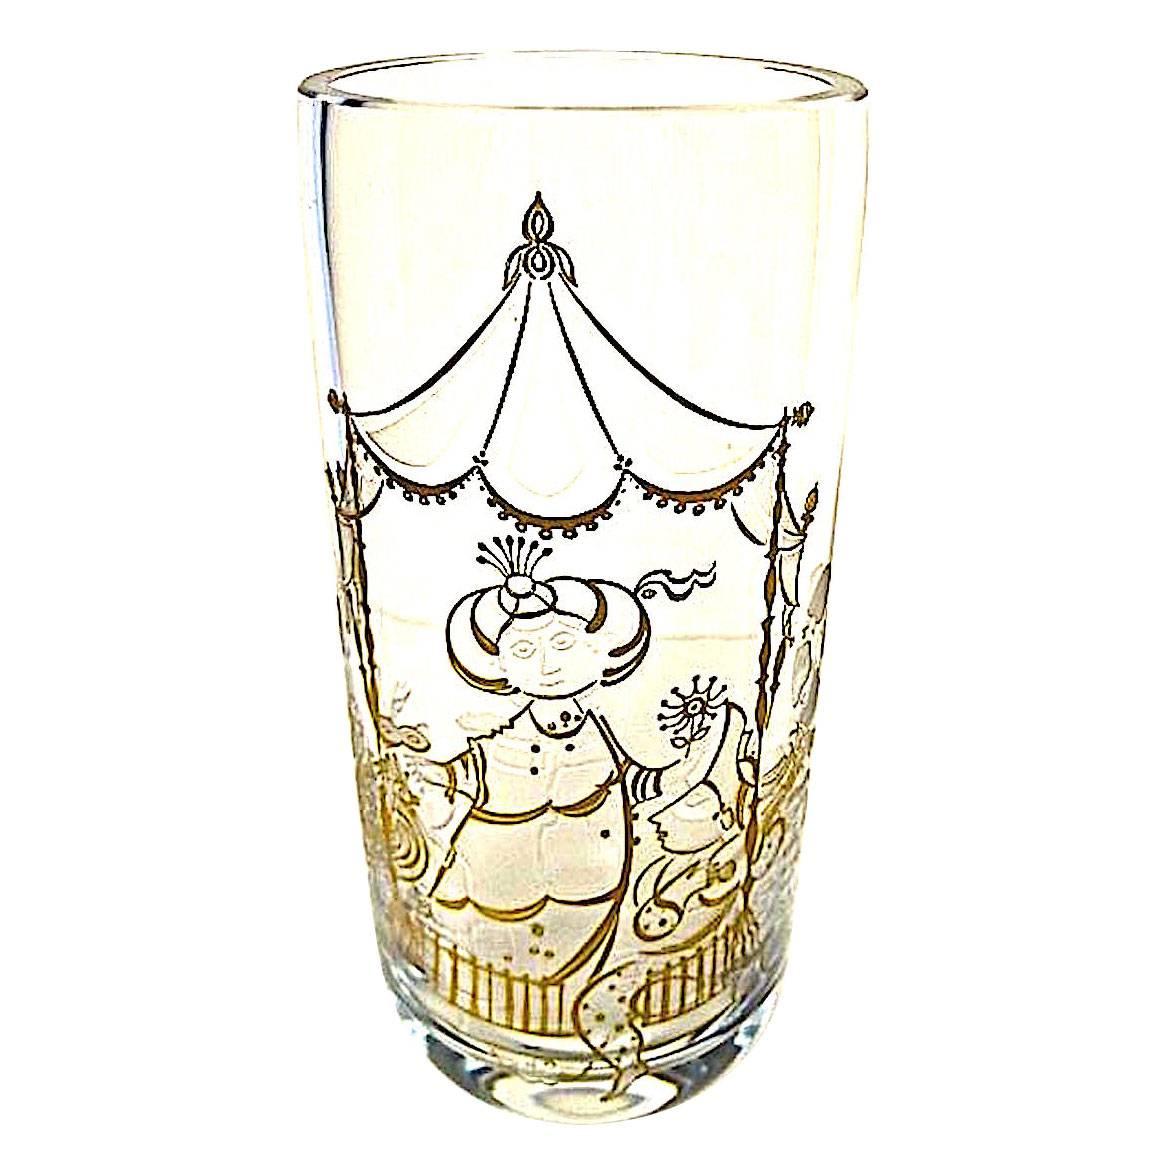 Charming, humorous, detailed and of substantial quality and weight, this is Wiinblad at his best. This is a brilliant addition to a glass collection.
Mid-Century gold etched and enchanting engraved design in thick heavy clear crystal art glass vase